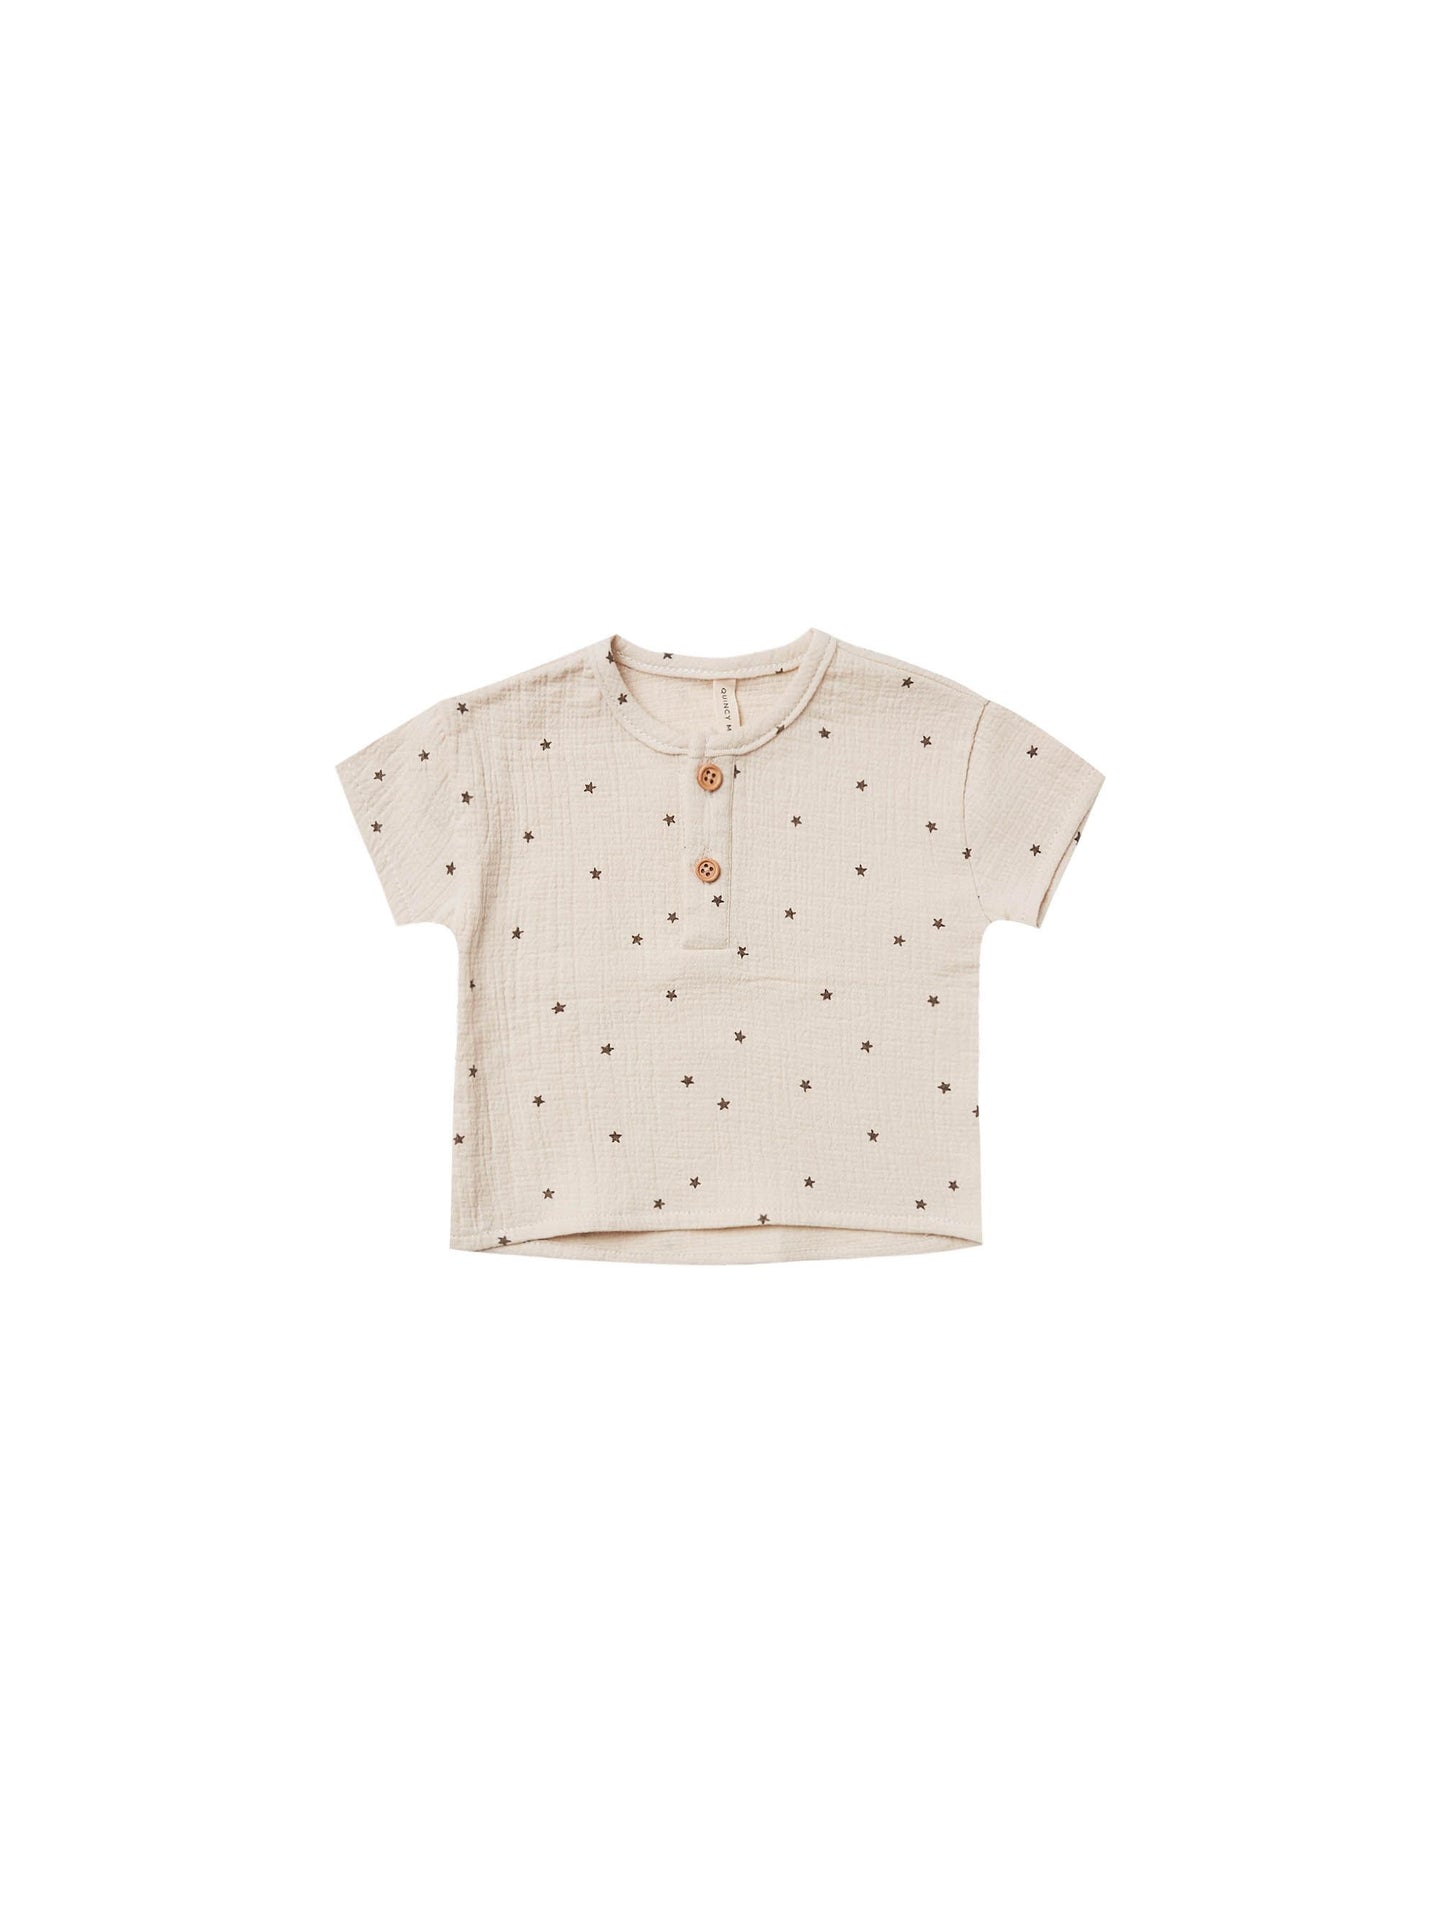 Quincy Mae - Woven Henry Top - Natural